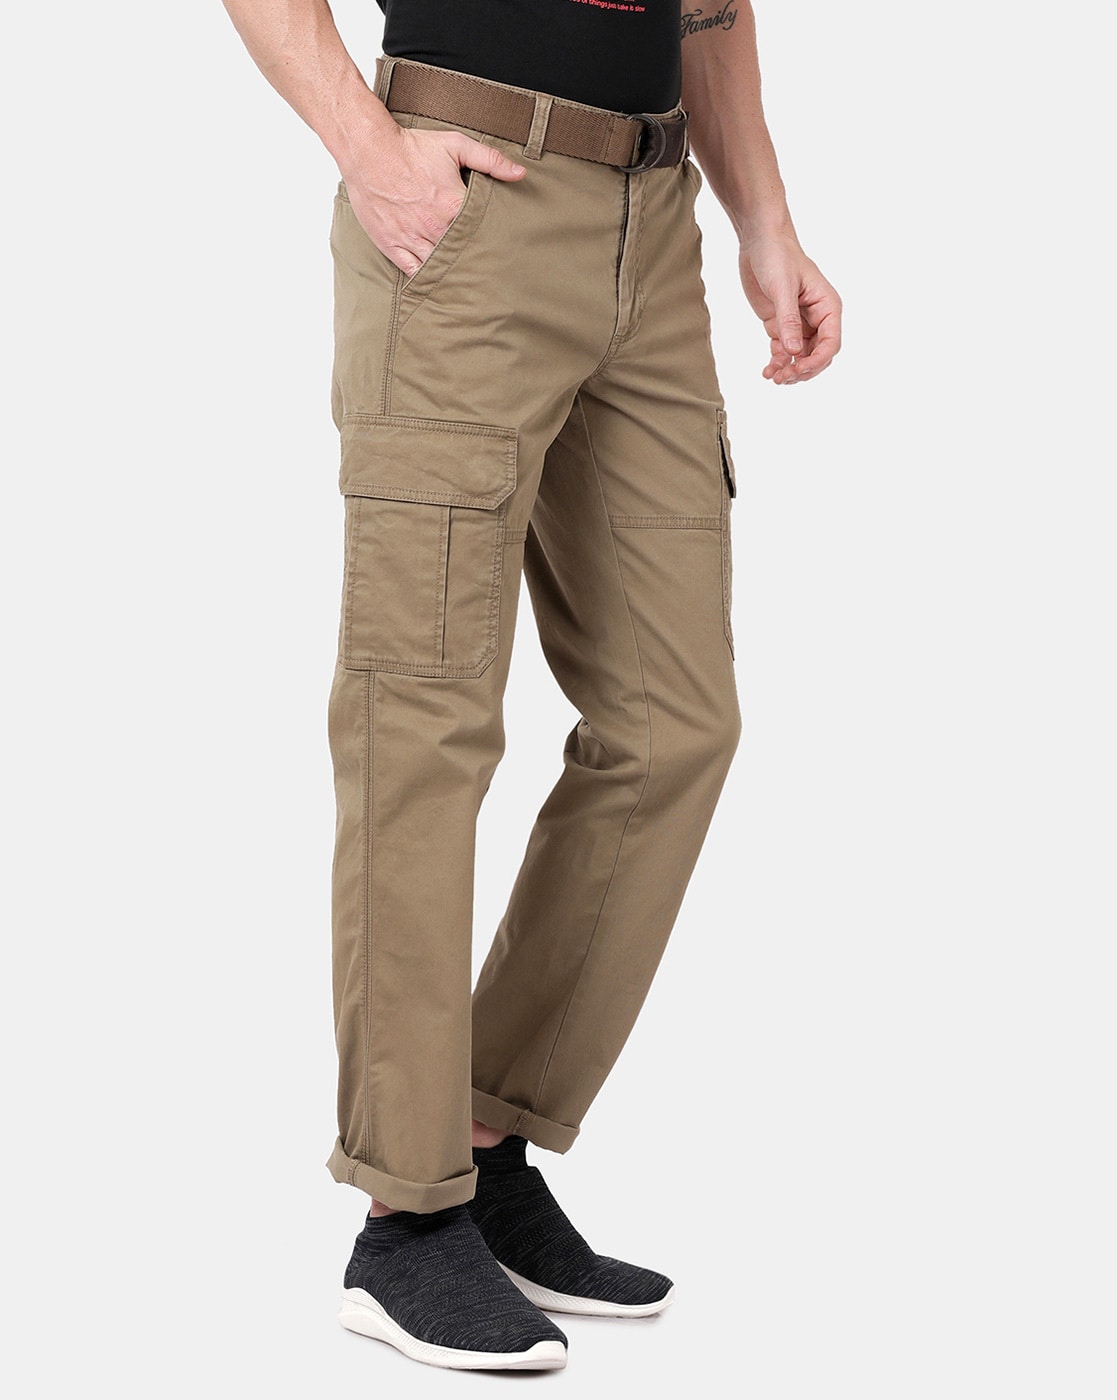 Buy tbase Mens Olive Solid Cargo Pants  Cargo Pant for Men at Amazonin